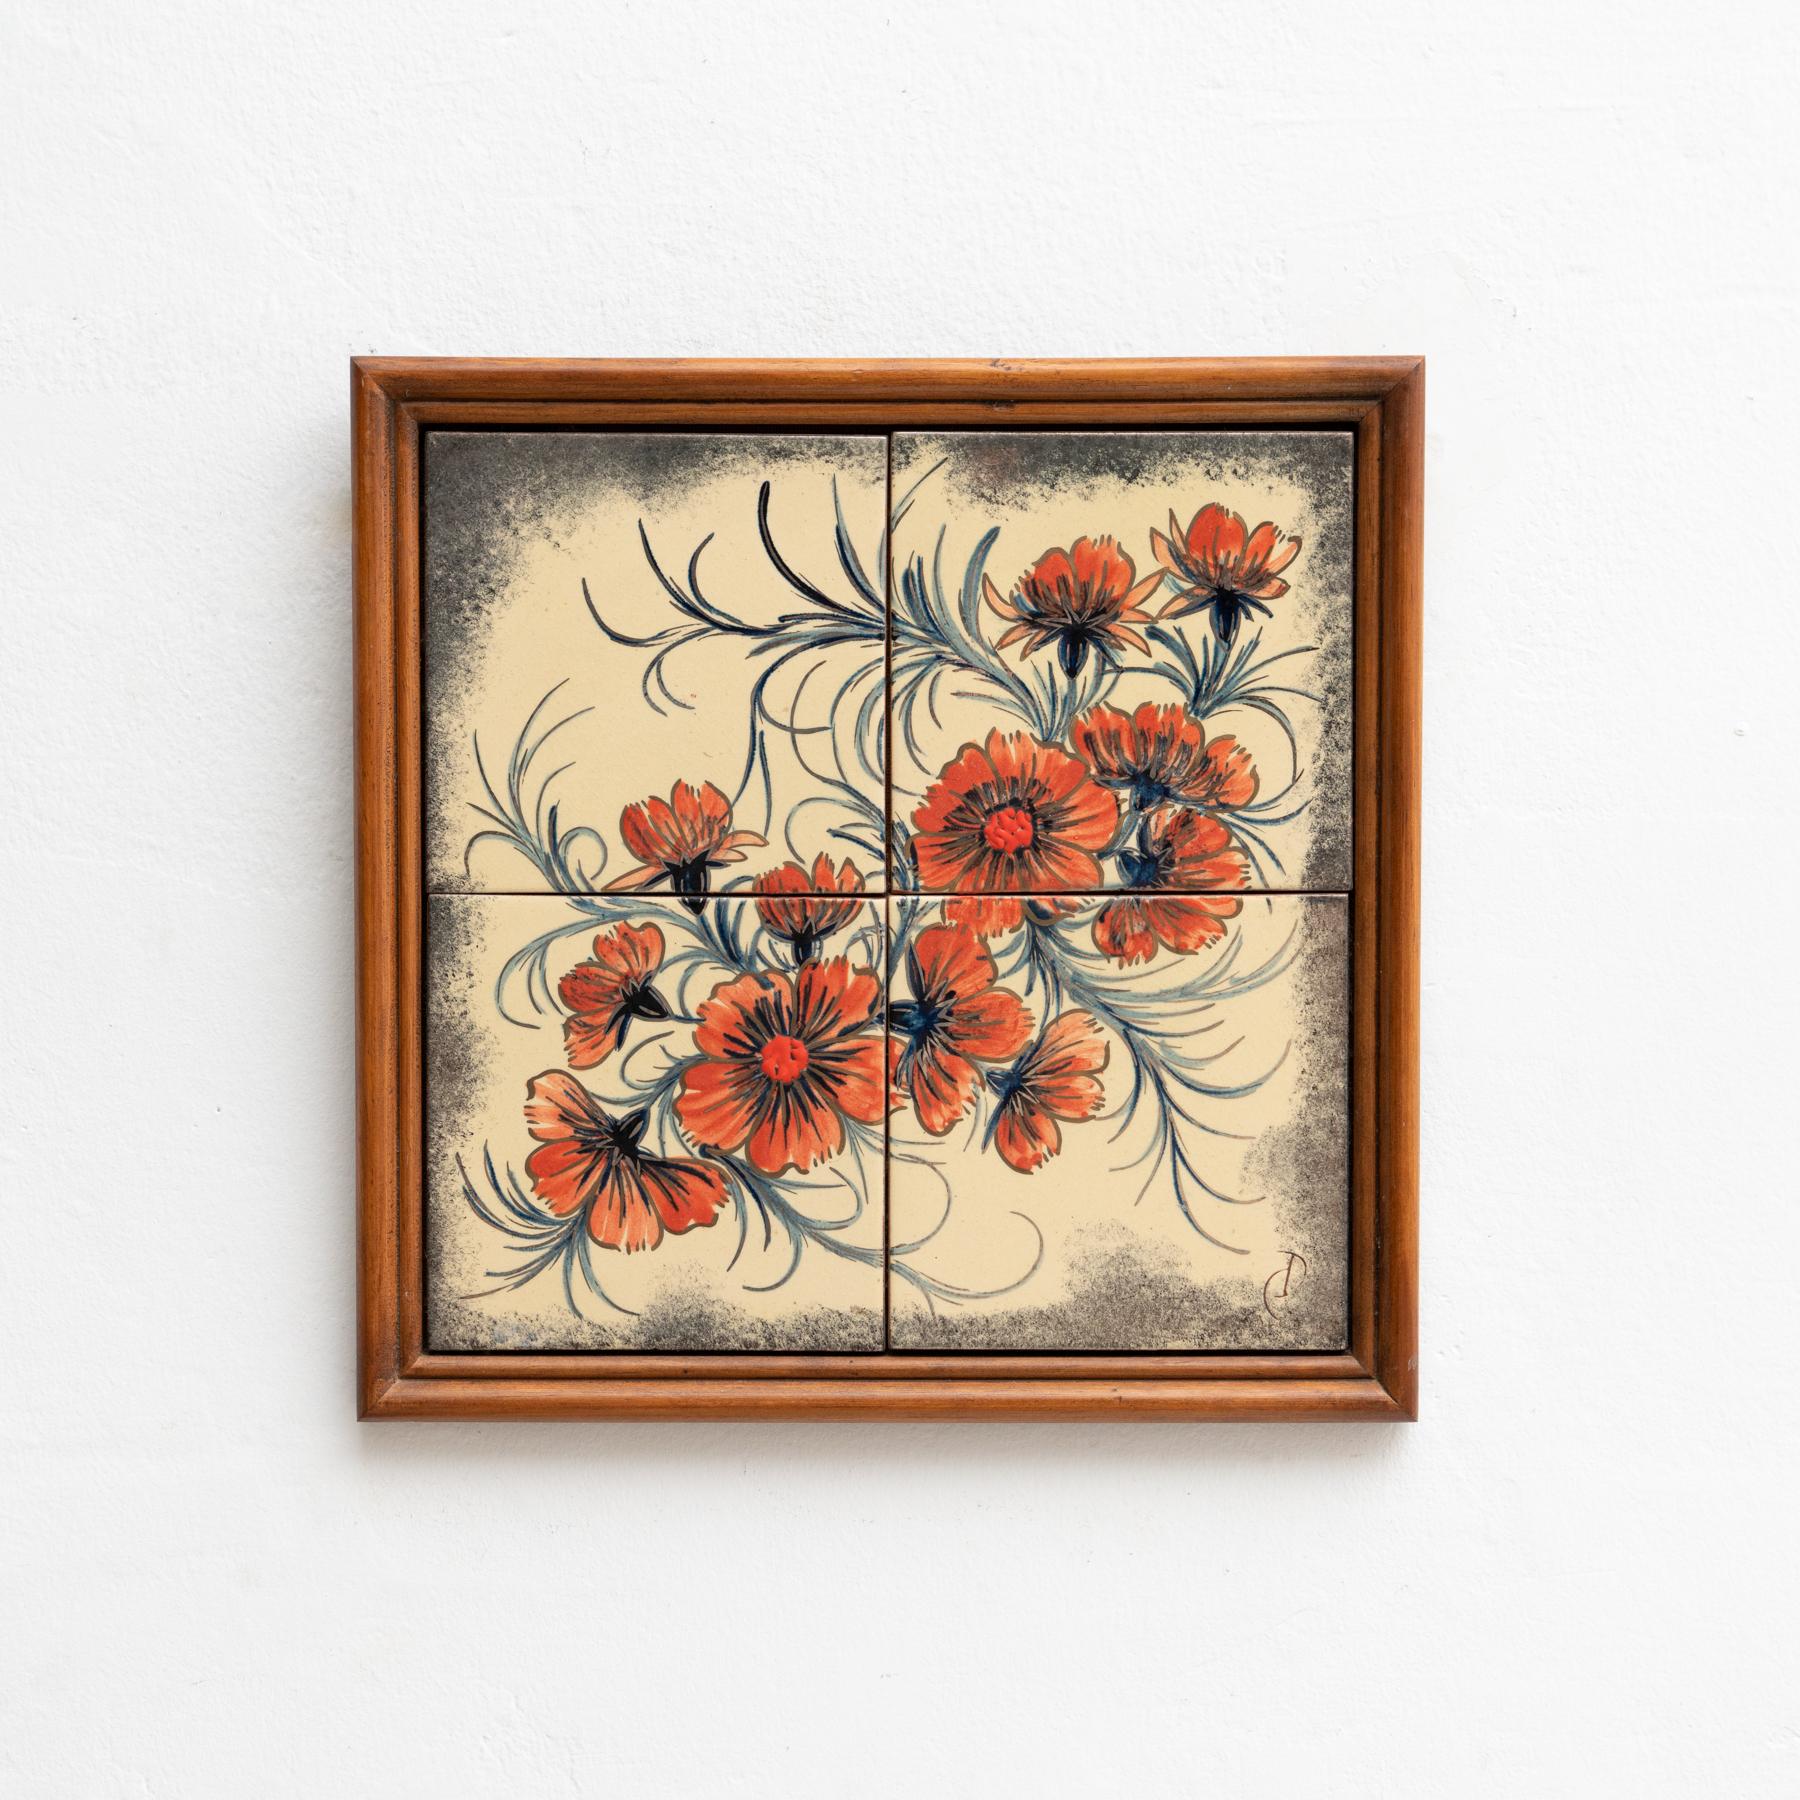 Ceramic hand painted artwork of a floral design by Catalan artist Diaz Costa, circa 1960.
Framed. Signed.

In original condition, with minor wear consistent of age and use, preserving a beautiul patina.